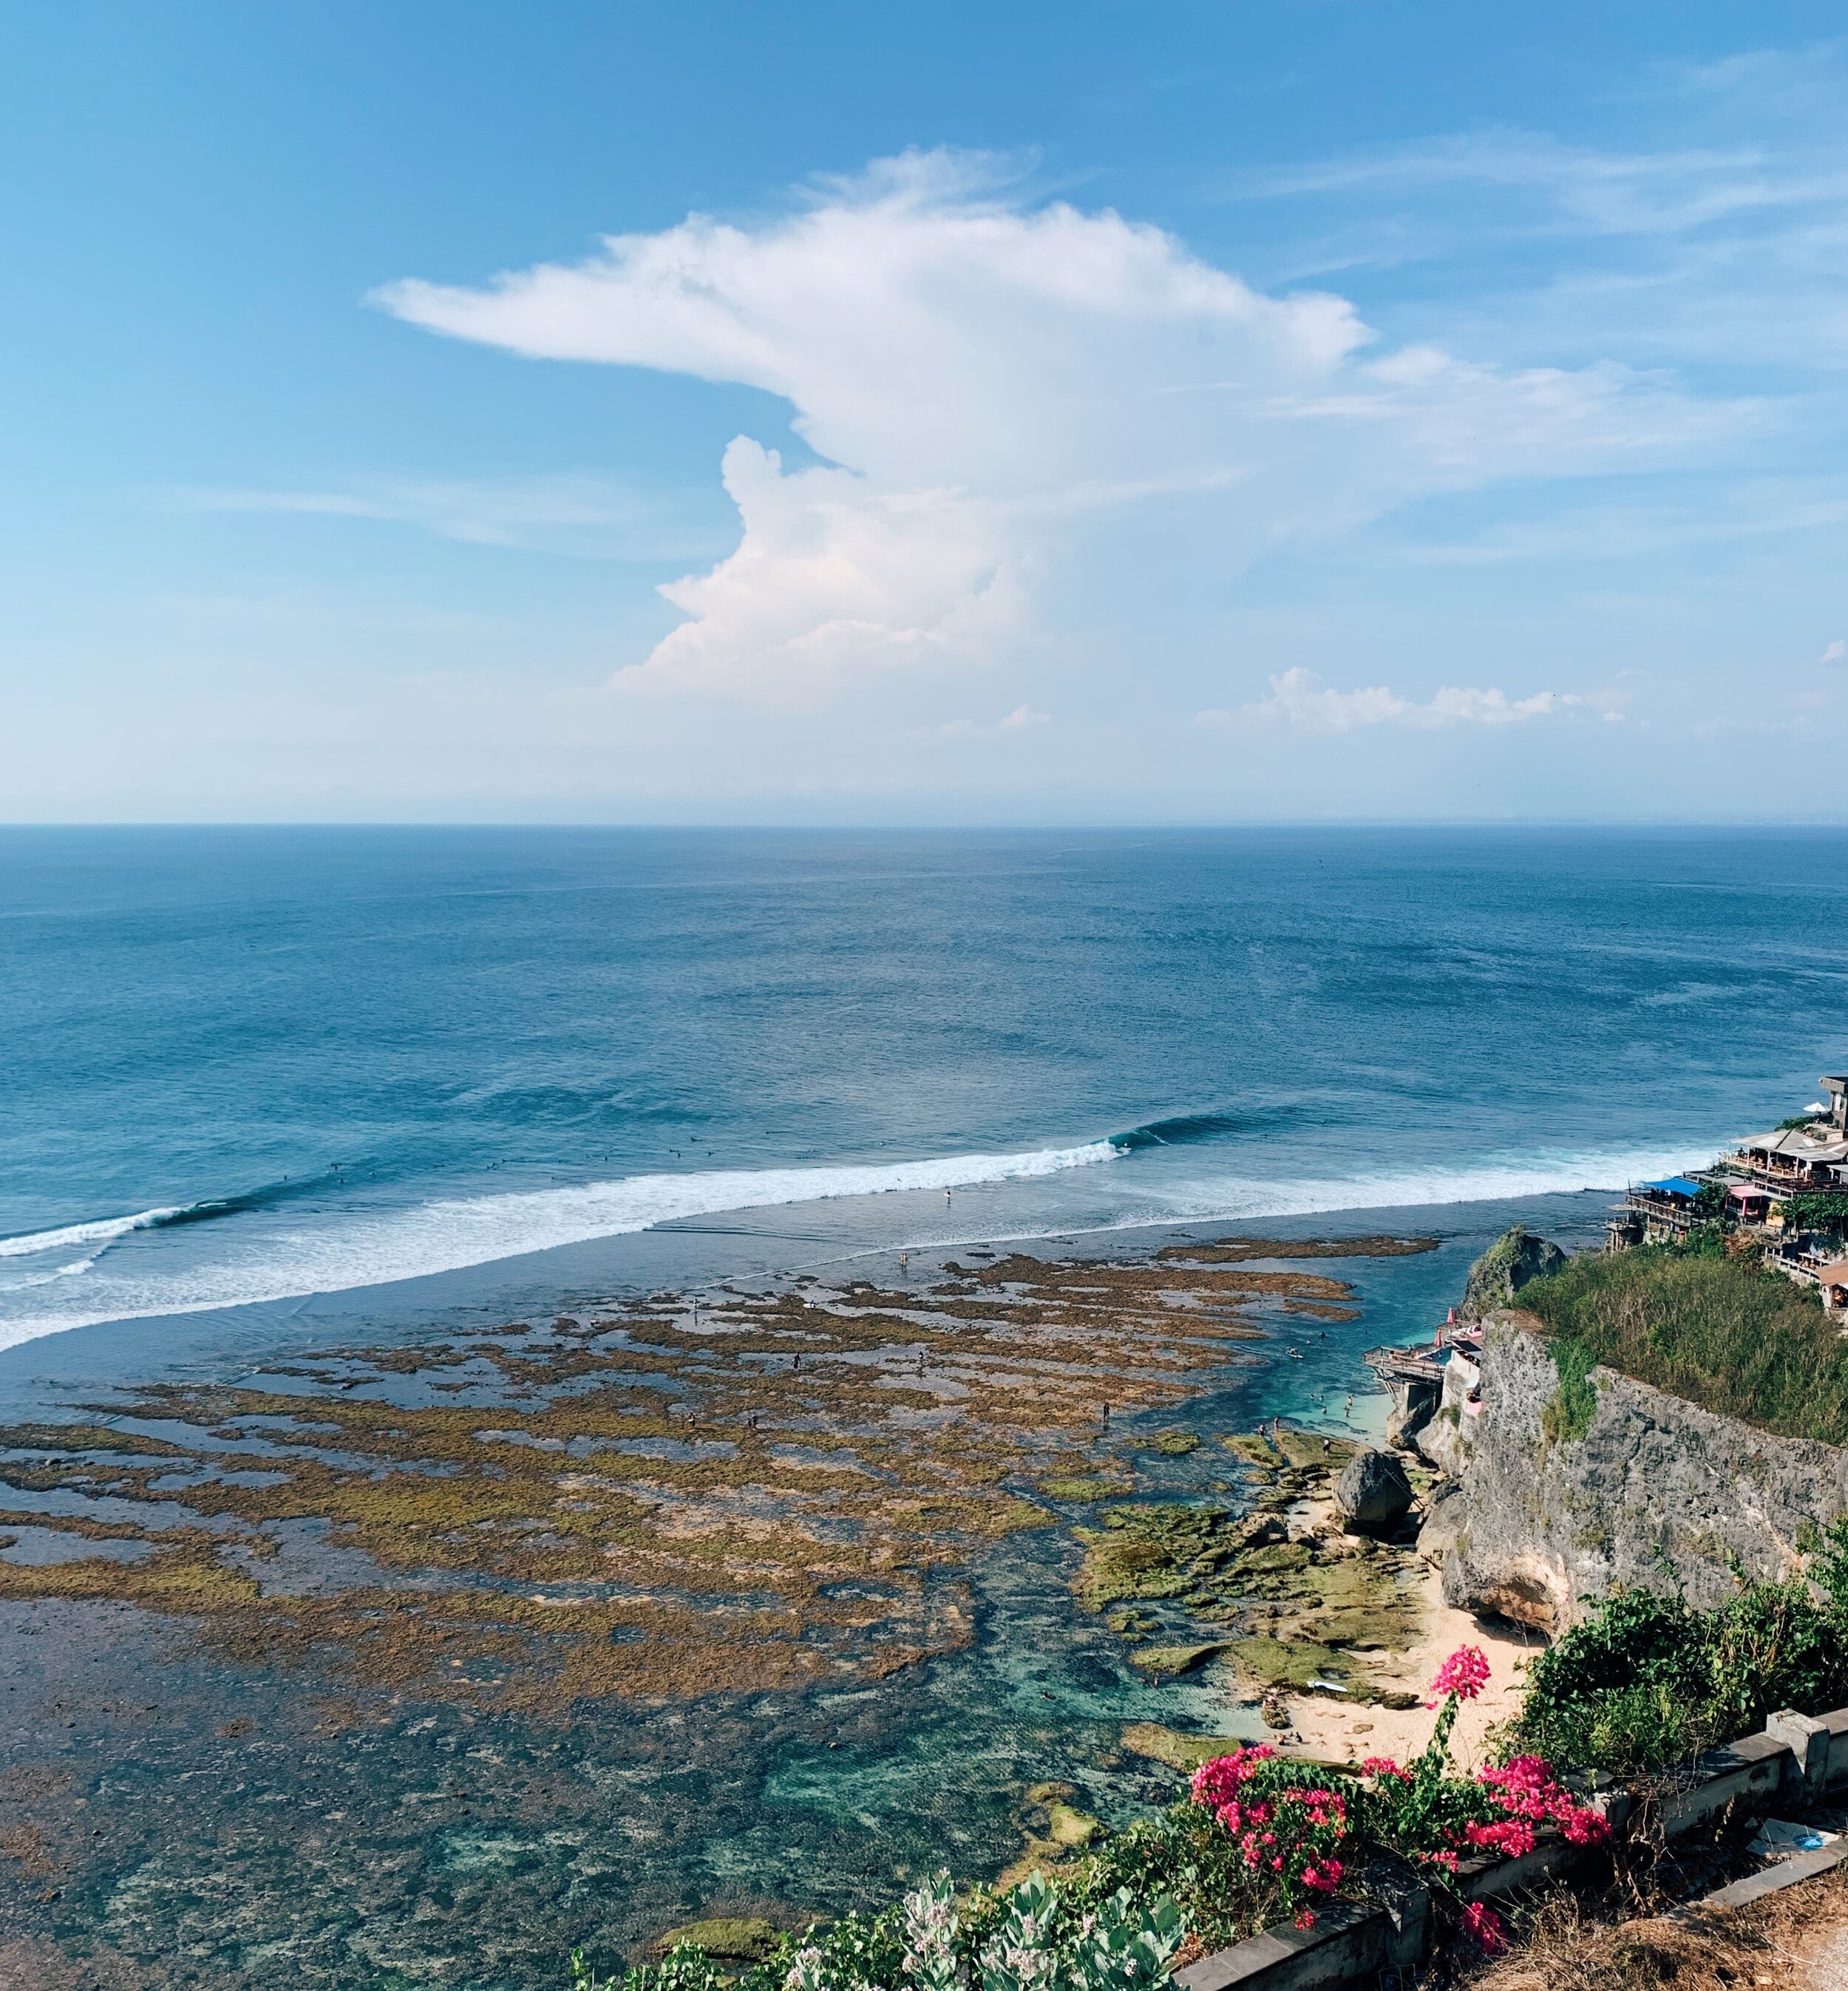  The infamous wave, reef, and cliff. Uluwatu, Bali. 